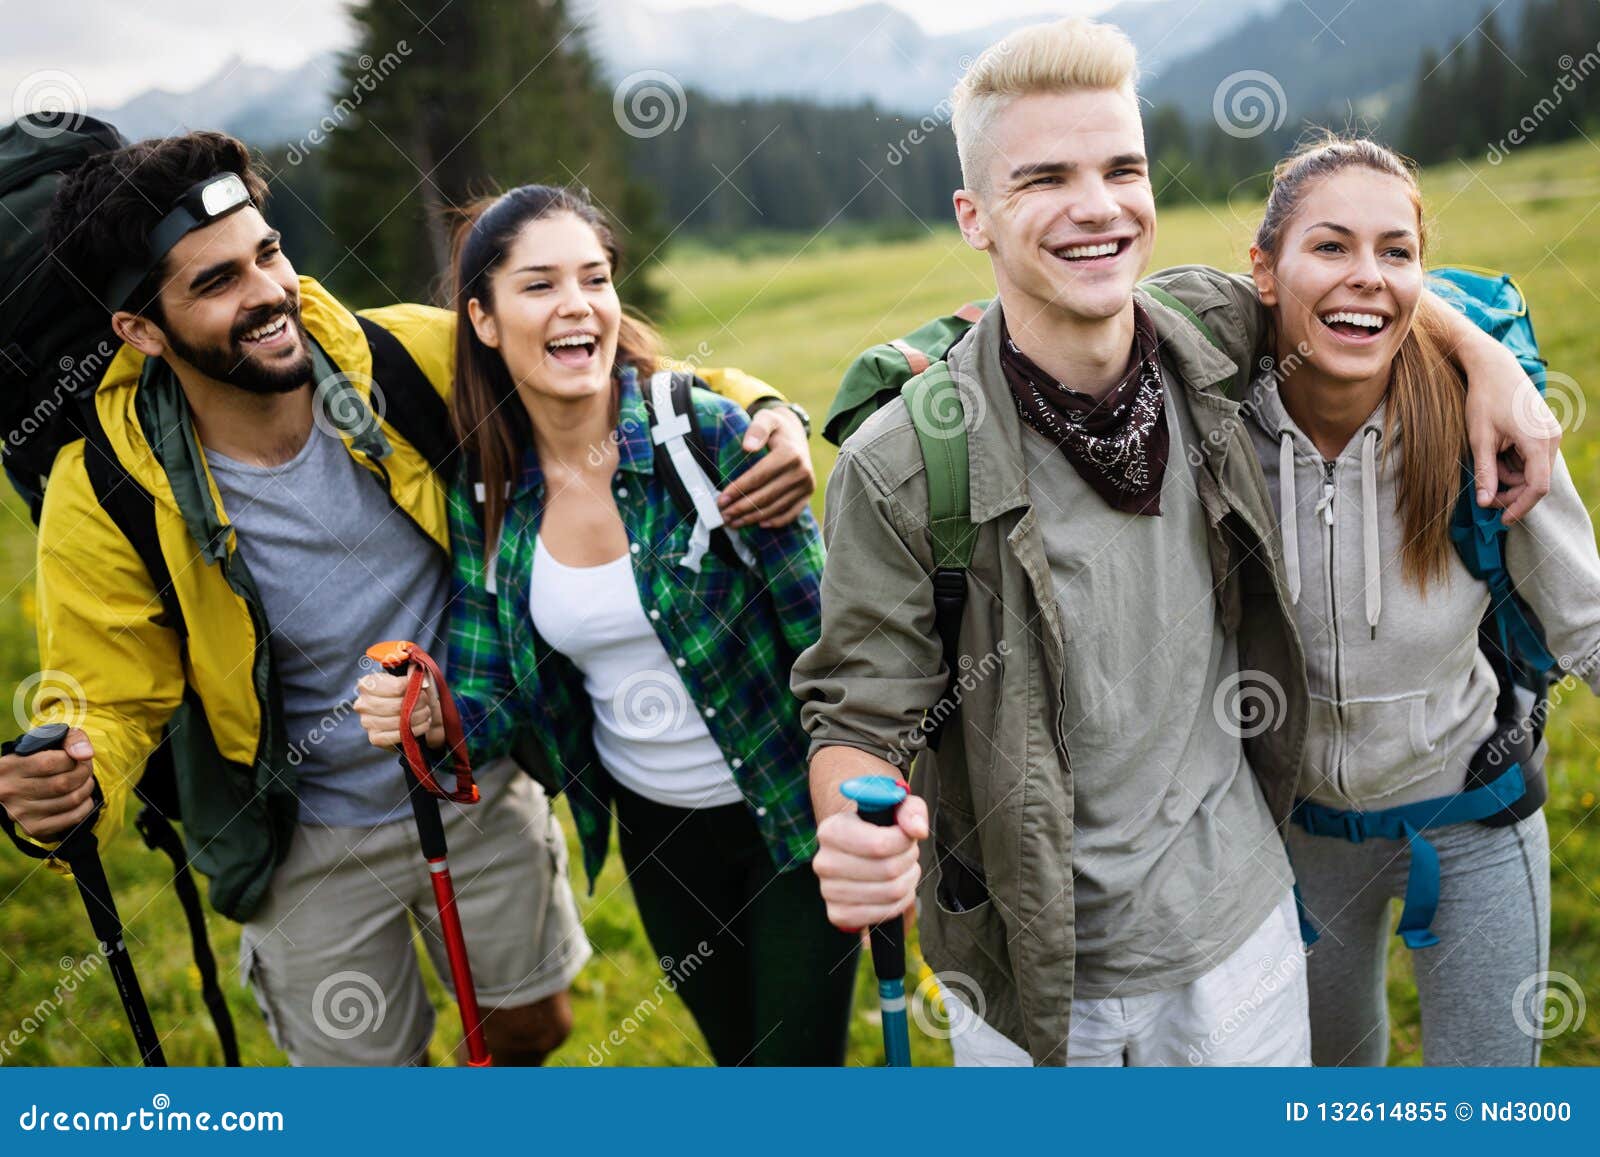 Hiking with Friends is so Fun. Group of Young People with Backpacks ...